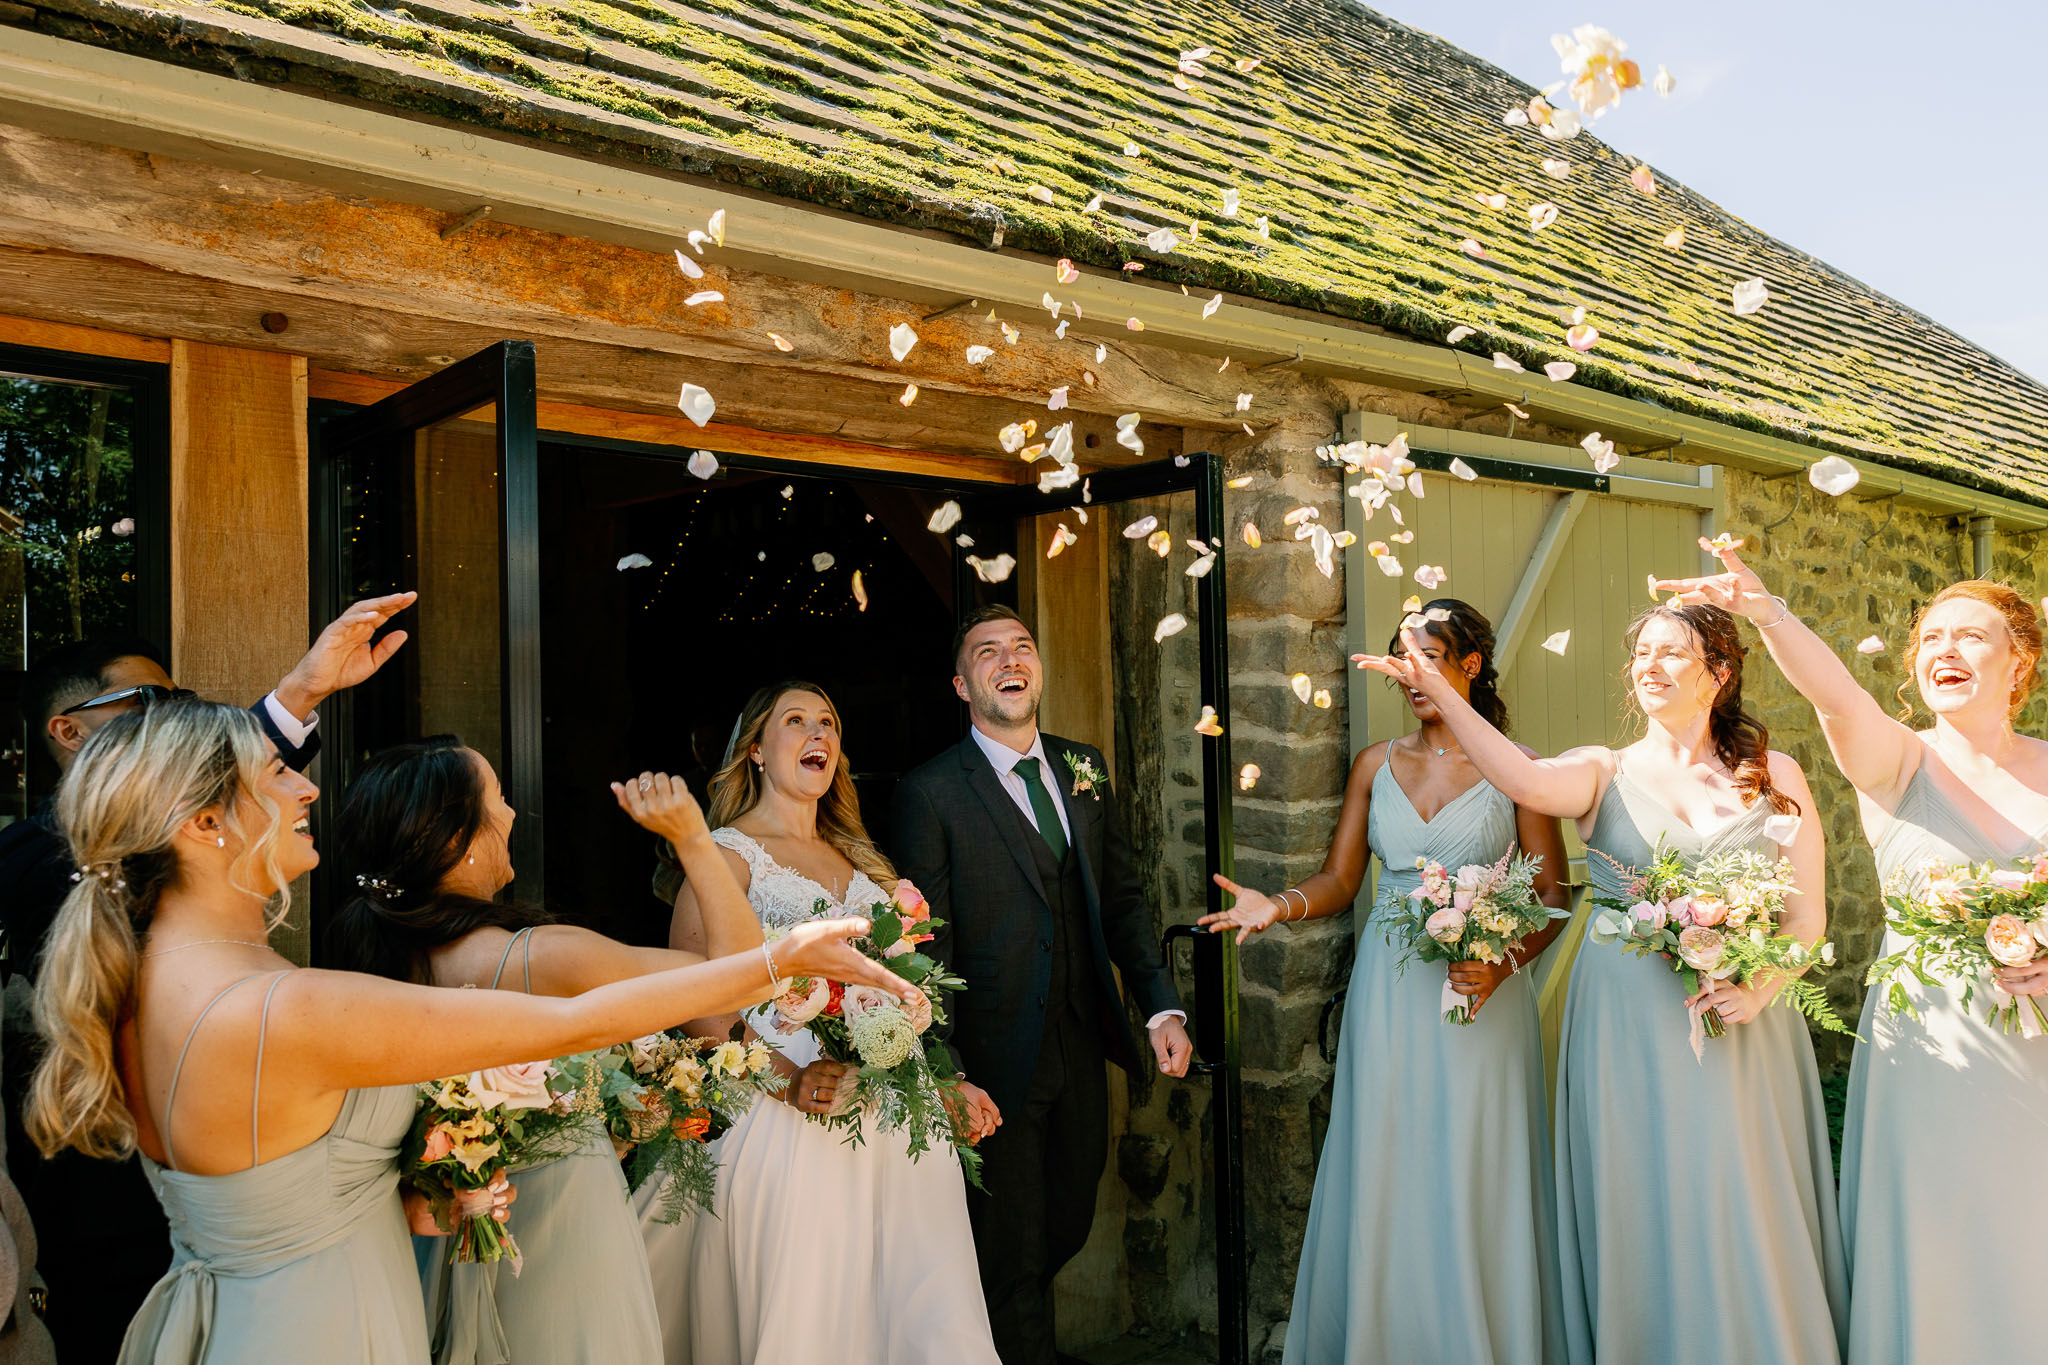 Confetti outdoors at a summer wedding